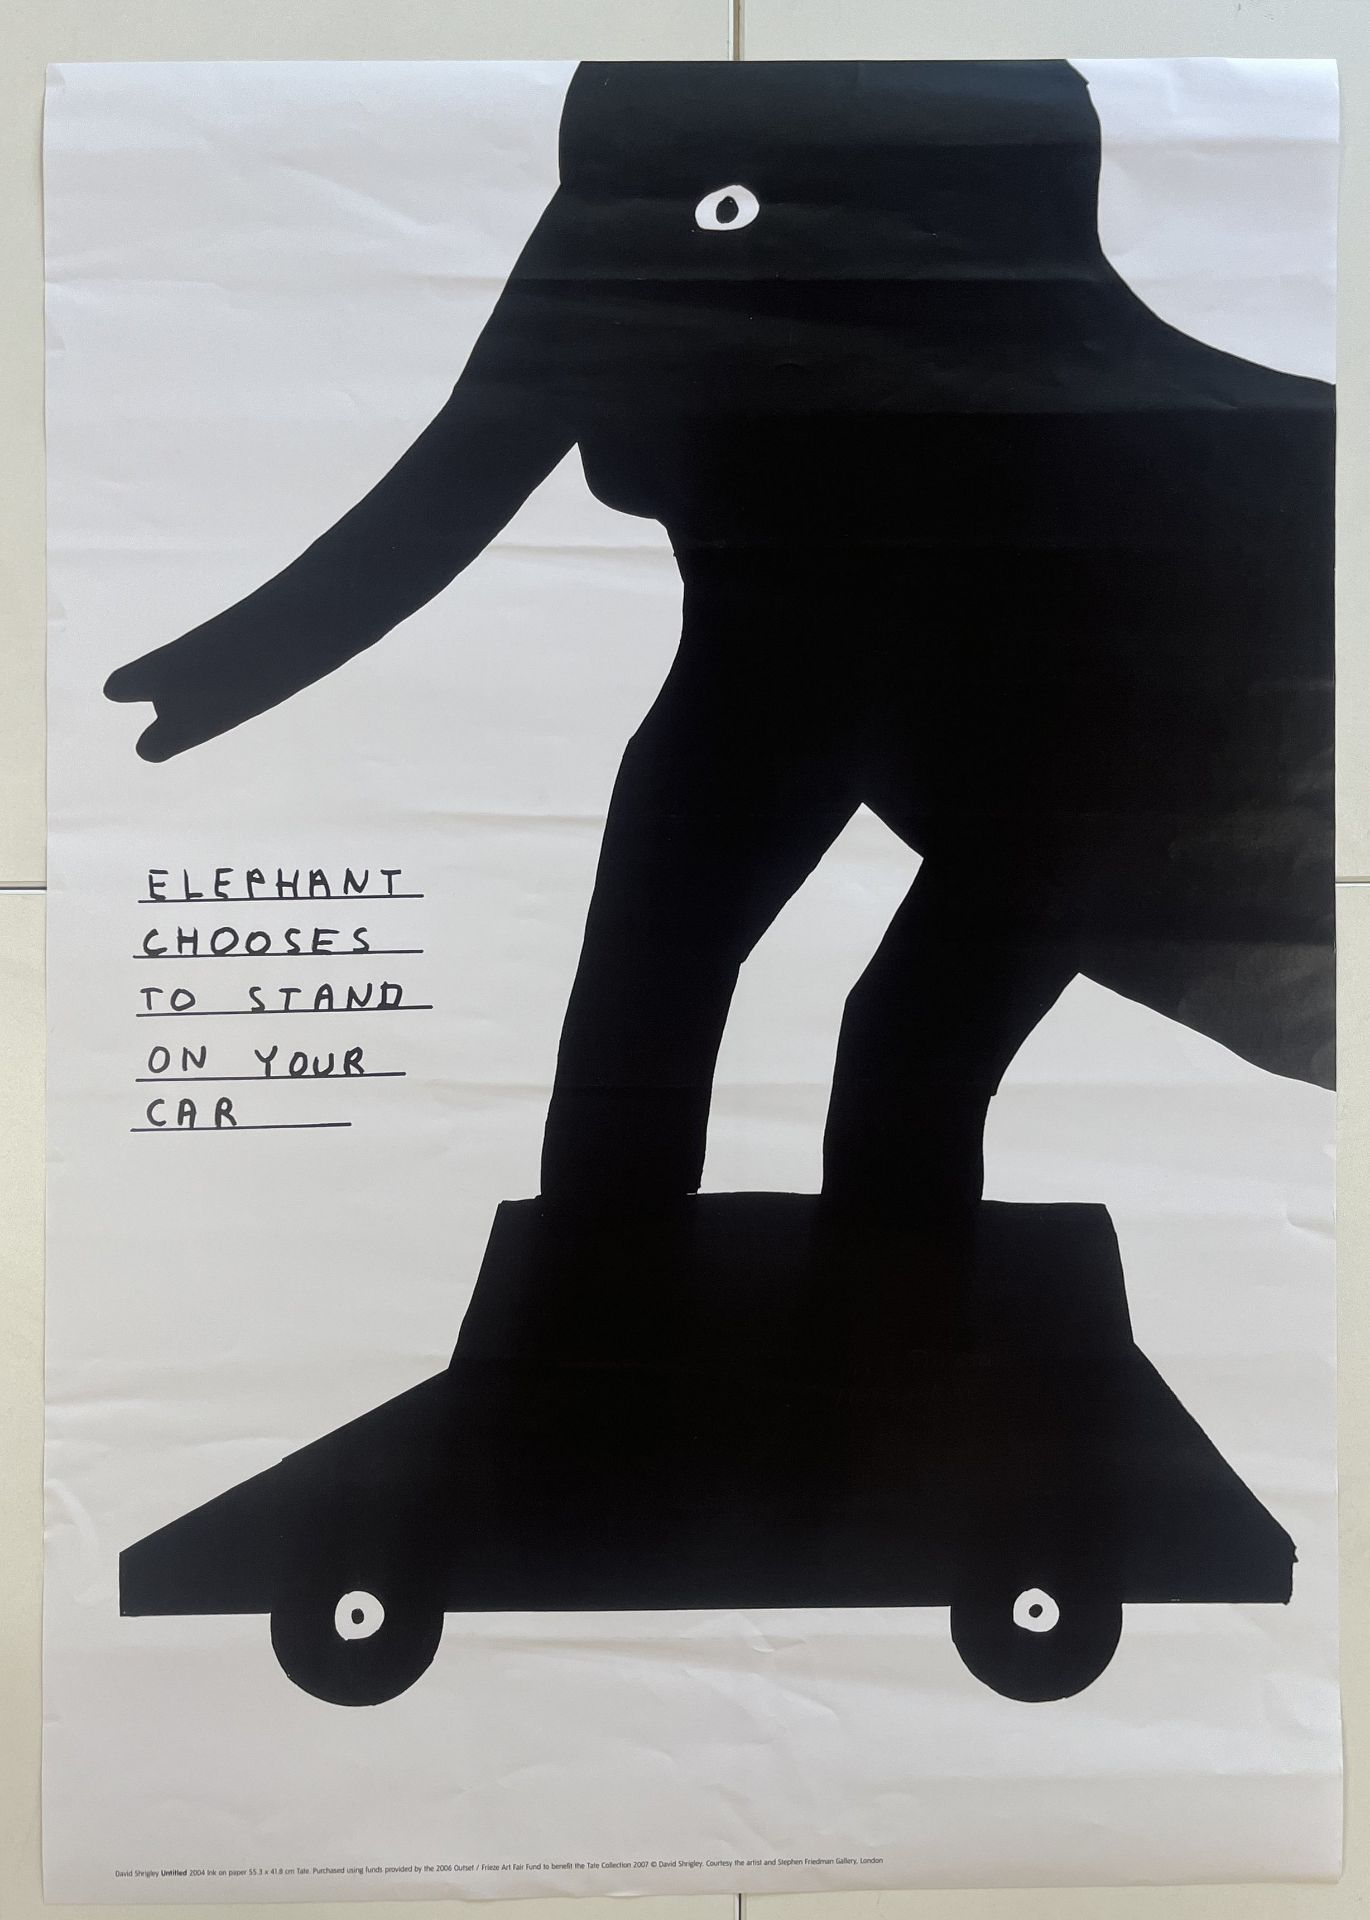 DAVID SHRIGLEY - ELEPHANT CHOOSES TO STAND ON YOUR CAR POSTER - Image 2 of 5